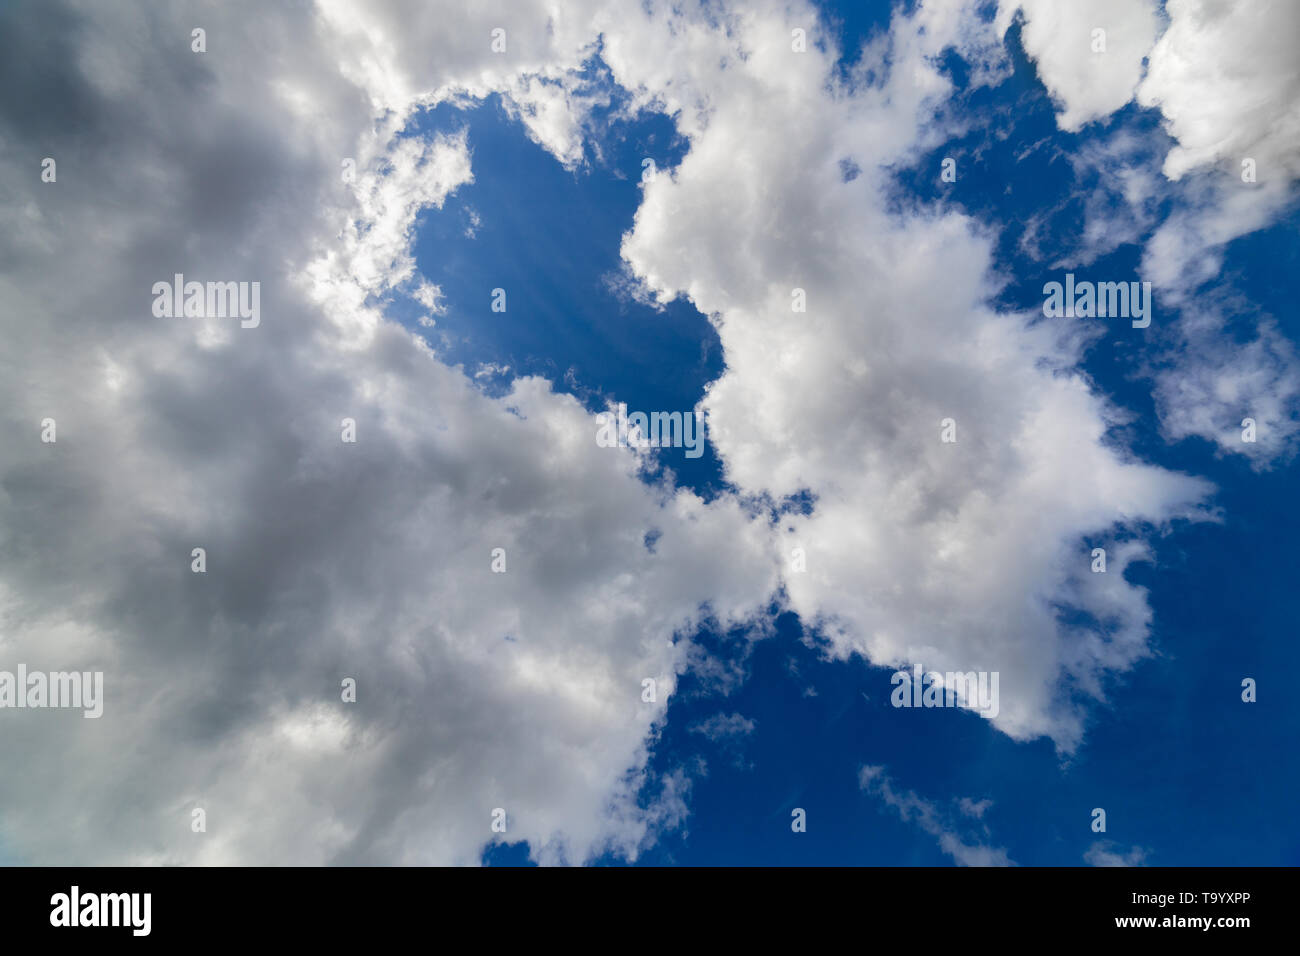 Regular spring clouds on blue sky at daylight in continental europe. Upward shot with wide angle lens without any filter. Stock Photo